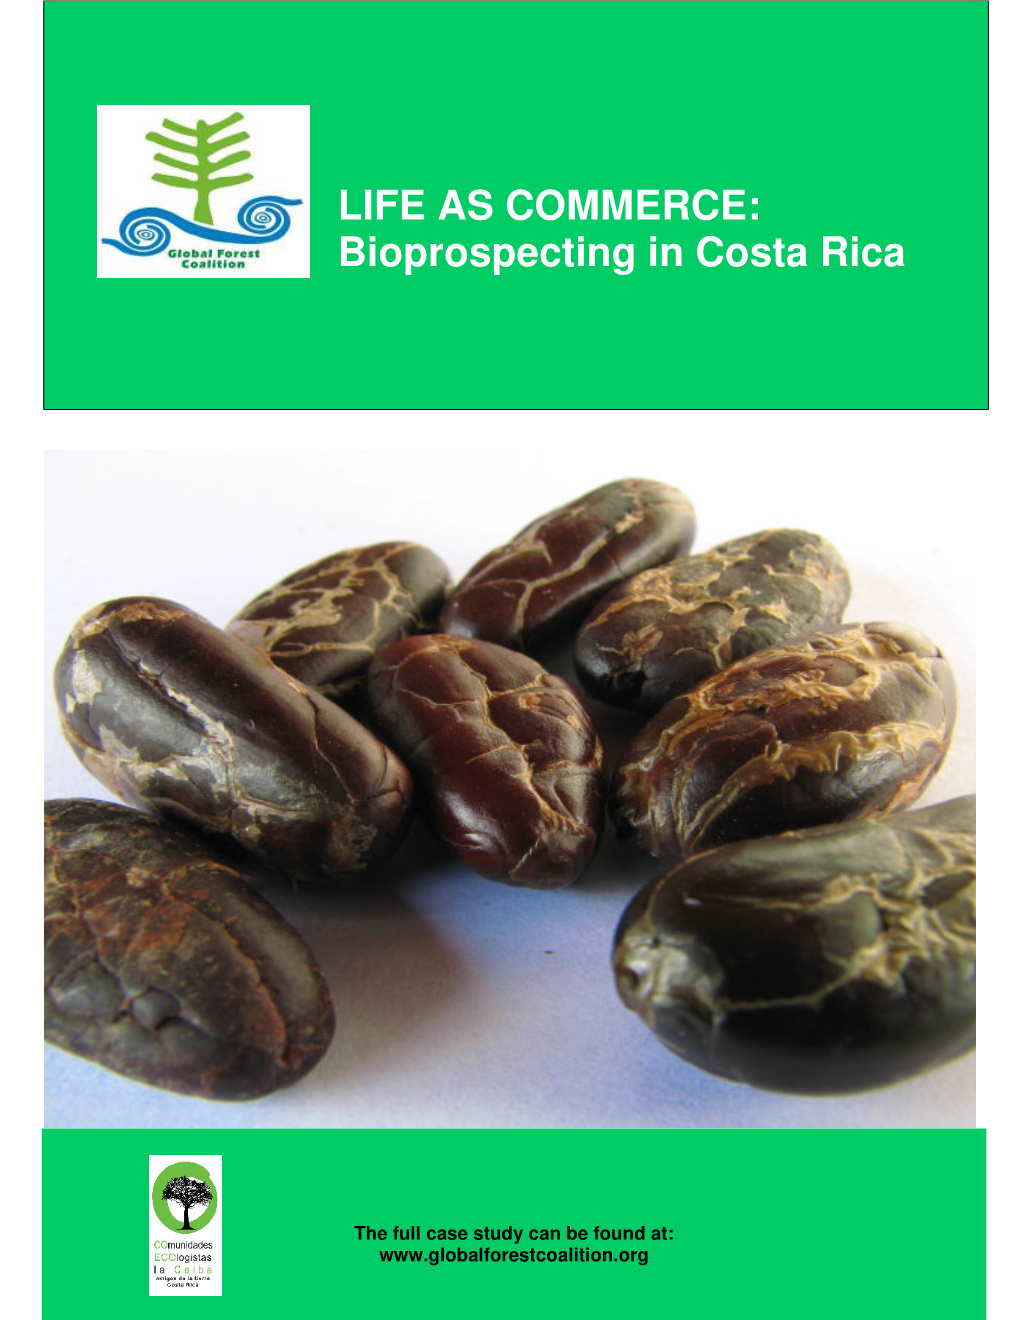 LIFE AS COMMERCE: Bioprospecting in Costa Rica, by COECOCEIBA, October 2008, 12 Pages